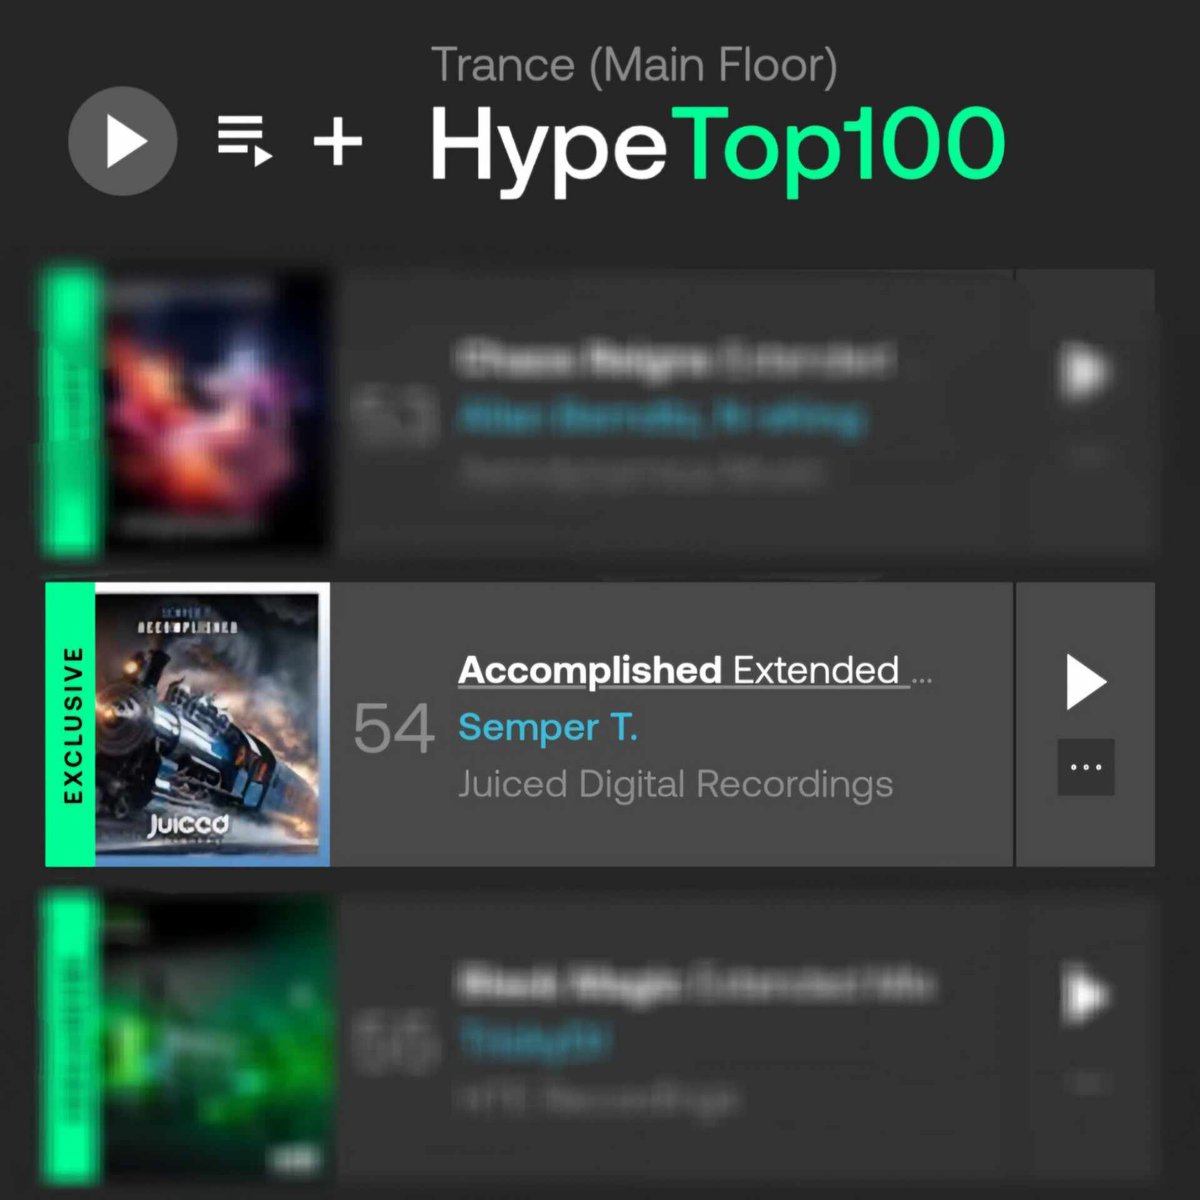 Climbing to no. 54 in the @beatport trance hype chart

Semper T. - Accomplished

Buy Now:
juiceddigital.ampsuite.com/releases/links…

Released by:
Juiced Digital Recordings

#trance #trancefamily #fypシ゚ #techtrance #upliftingtrance #juicedpure #releaseday #beatport #juiceddigital